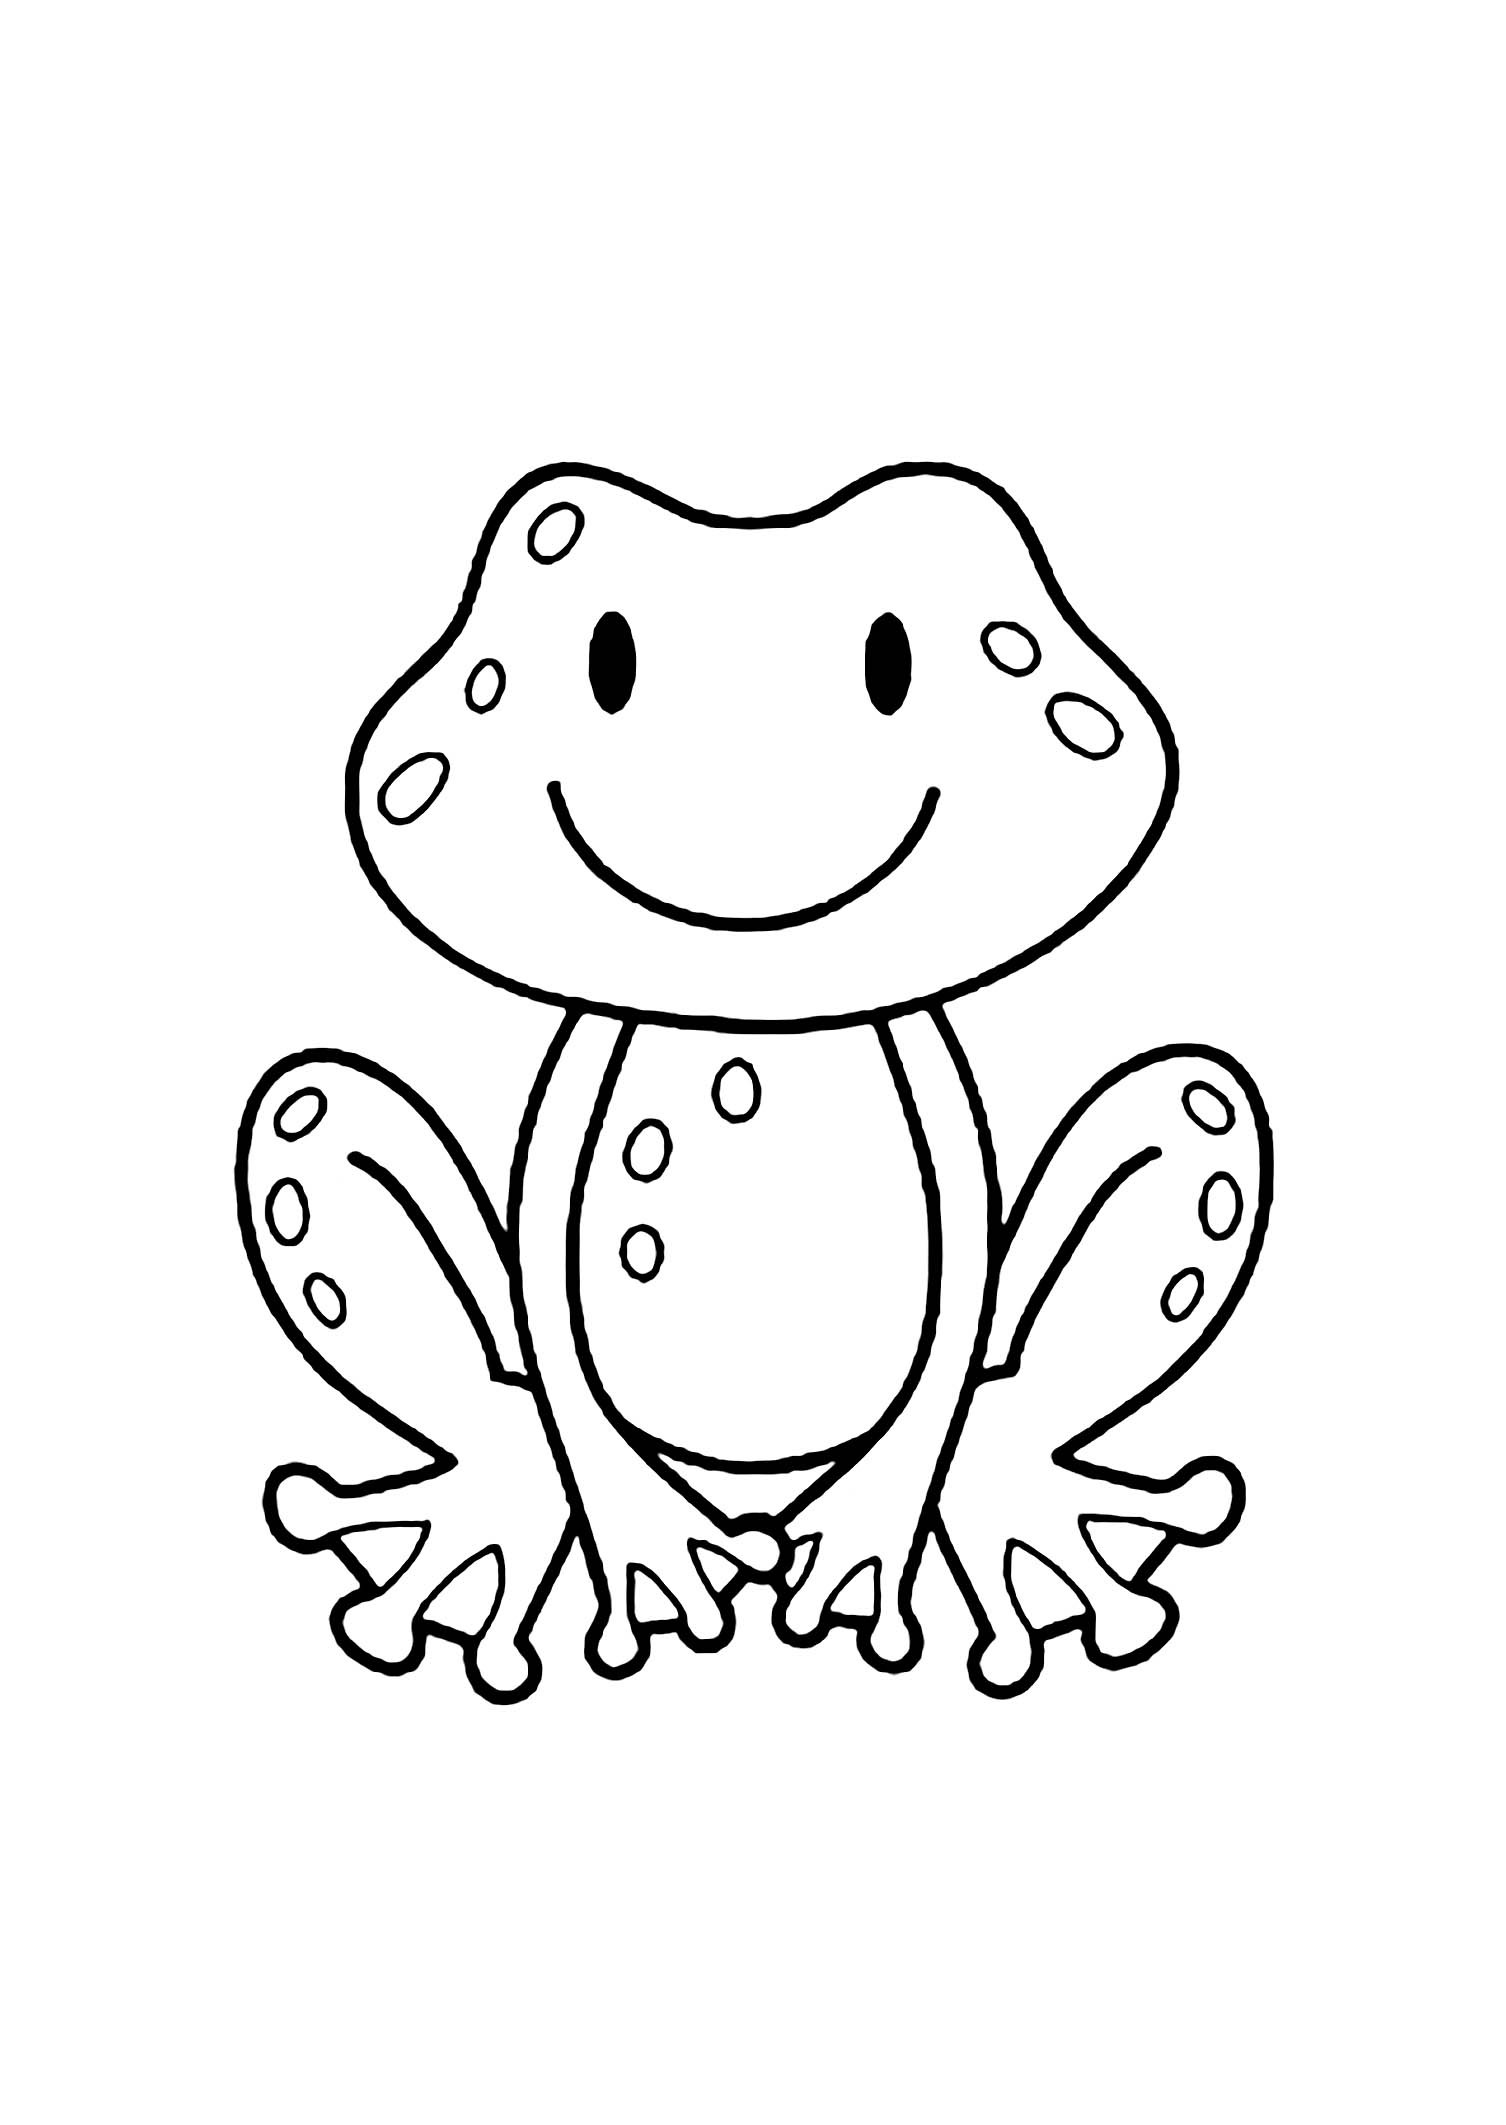 Frog Coloring Pages For Kids
 Frogs to color for children Frogs Kids Coloring Pages